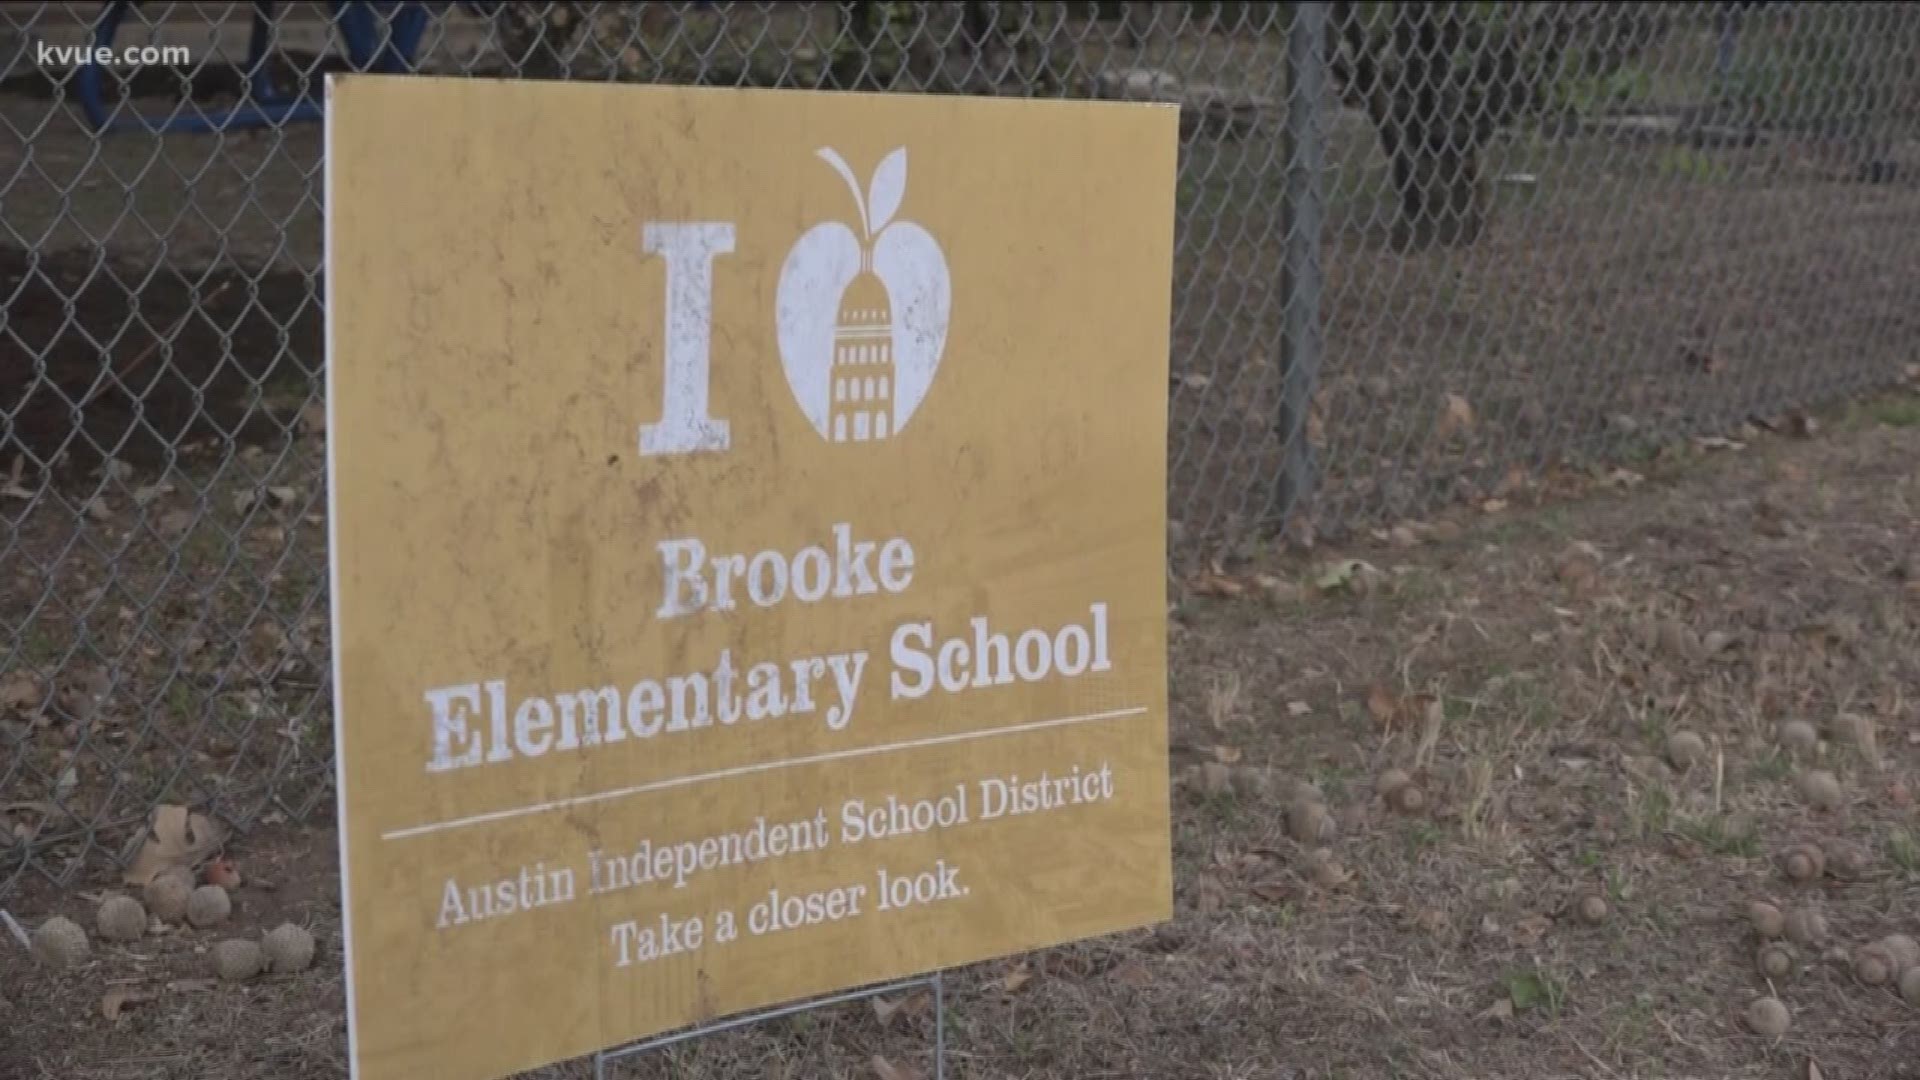 The Austin ISD board met Monday evening to discuss the district's new plan to close four schools instead of 12.